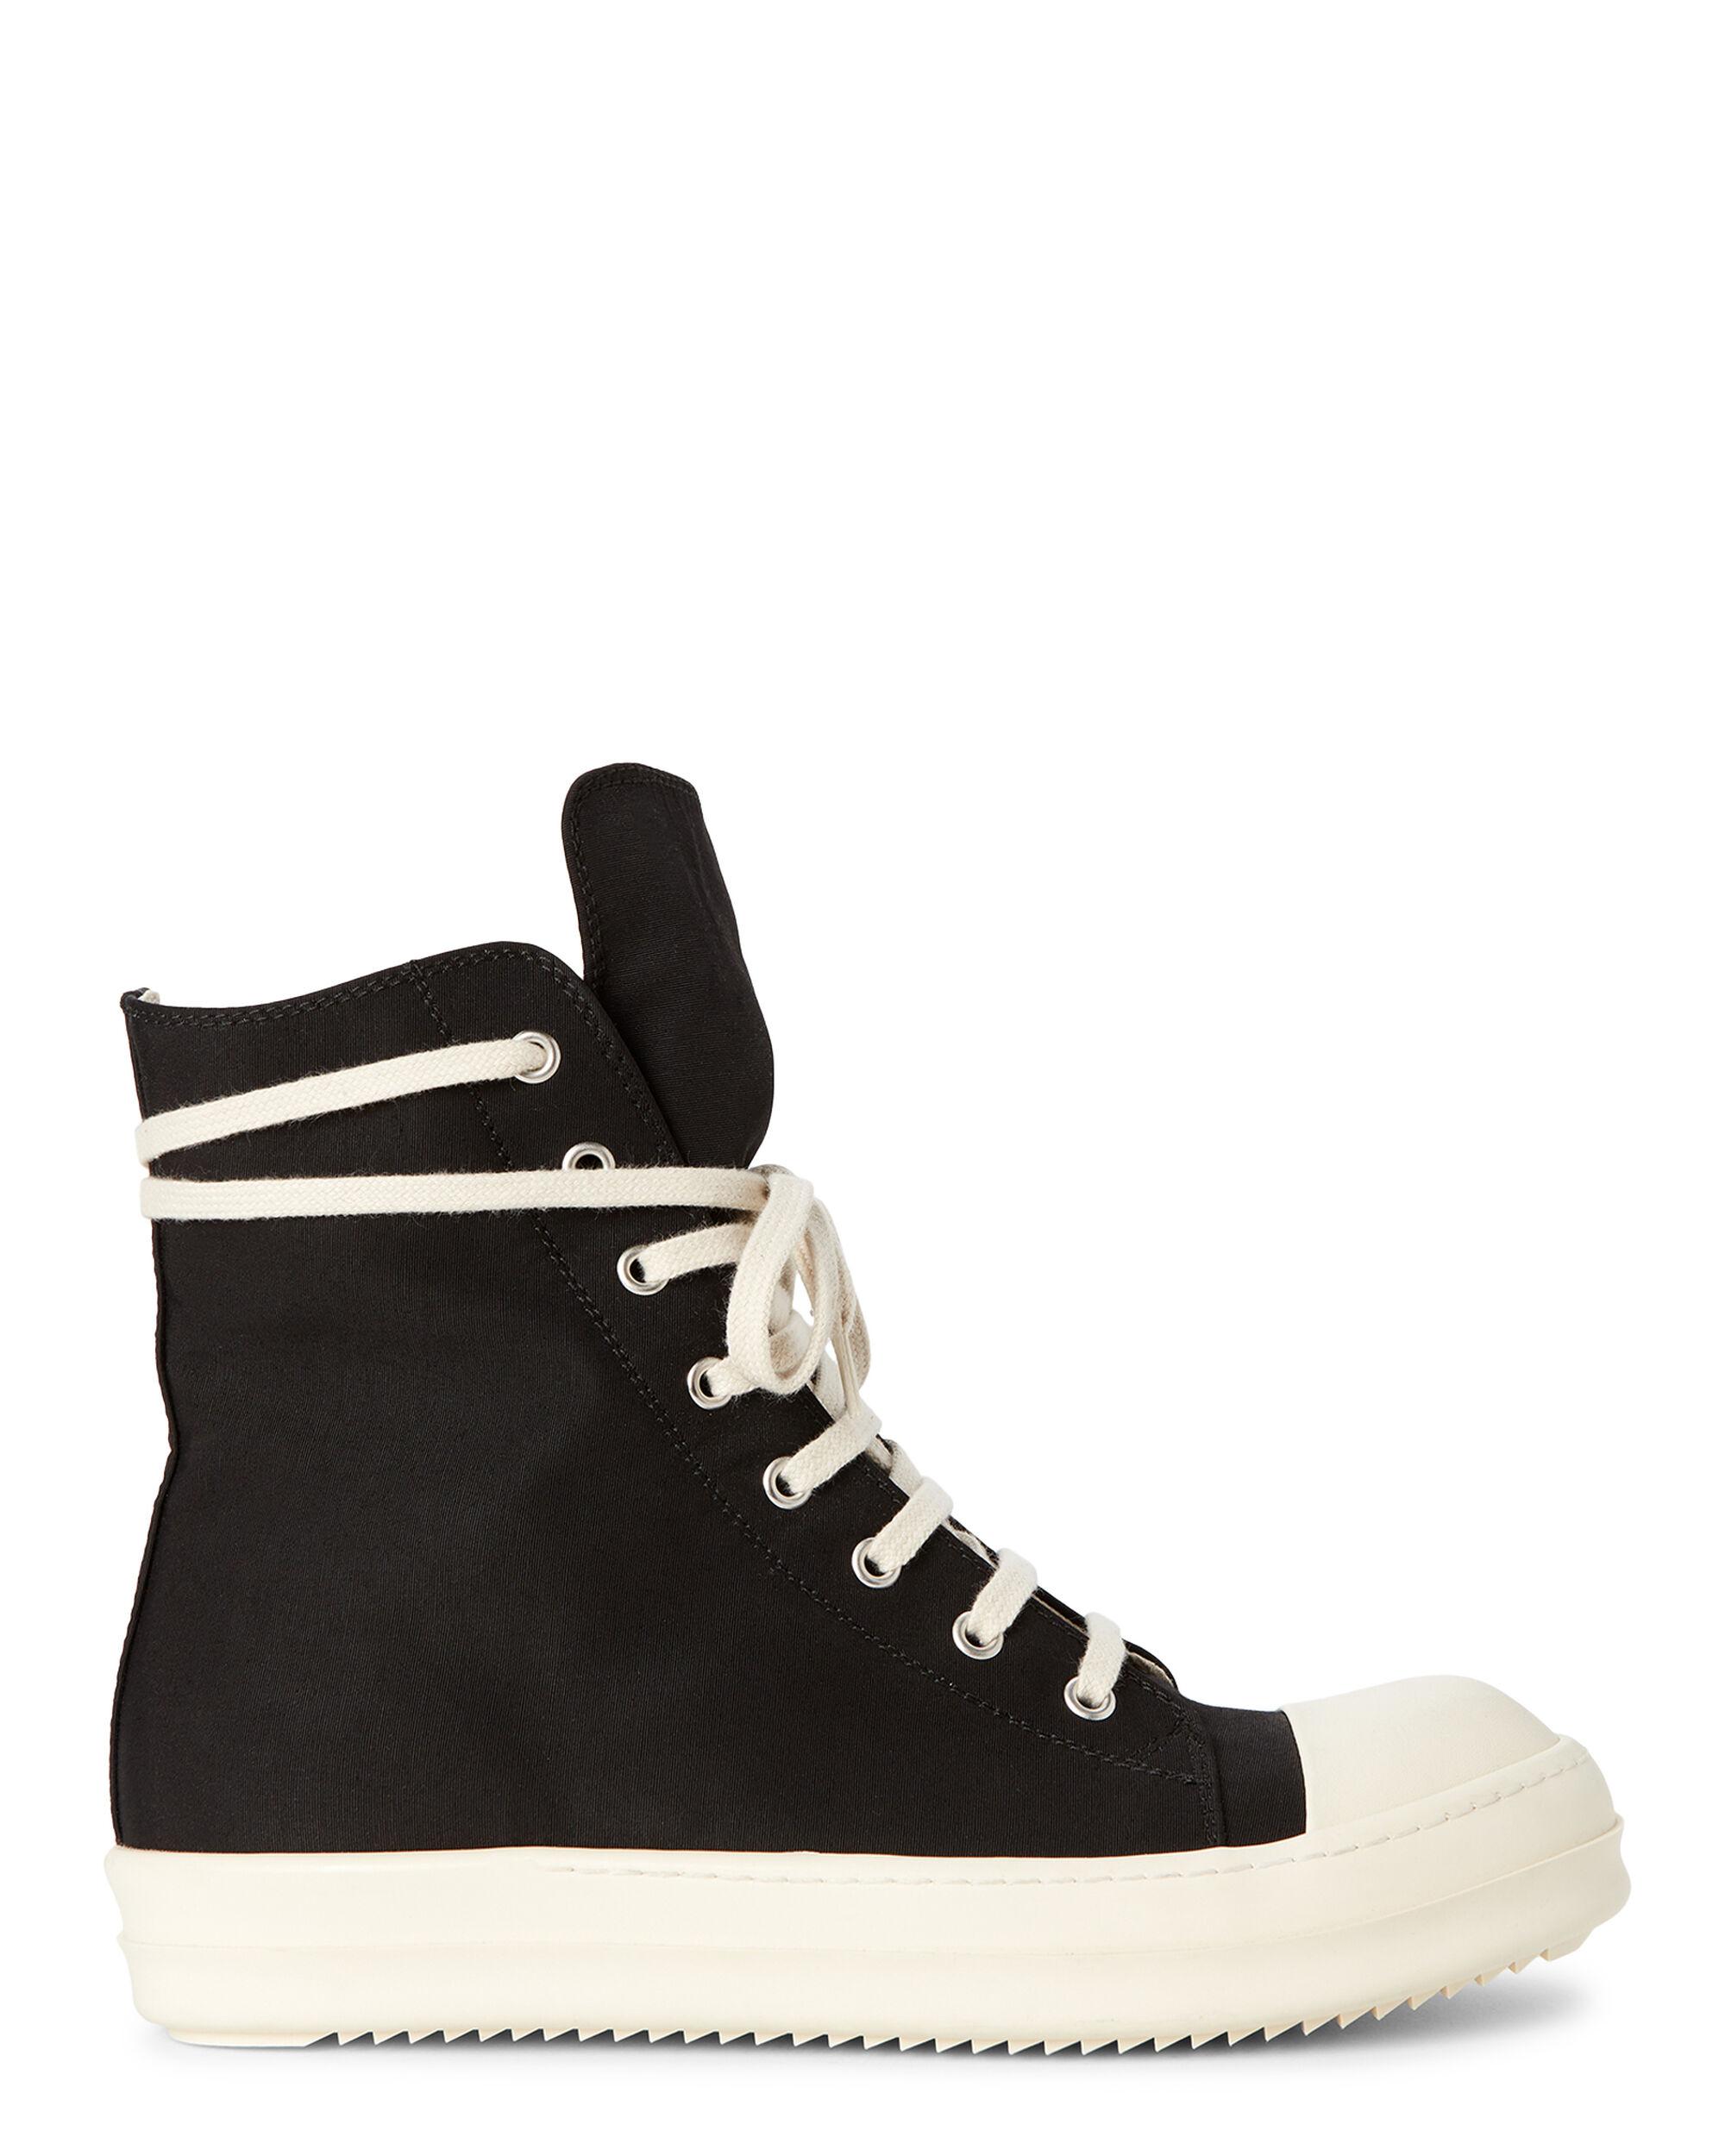 Rick Owens Drkshdw Synthetic Lace-up Nylon High-top Sneakers in Black ...